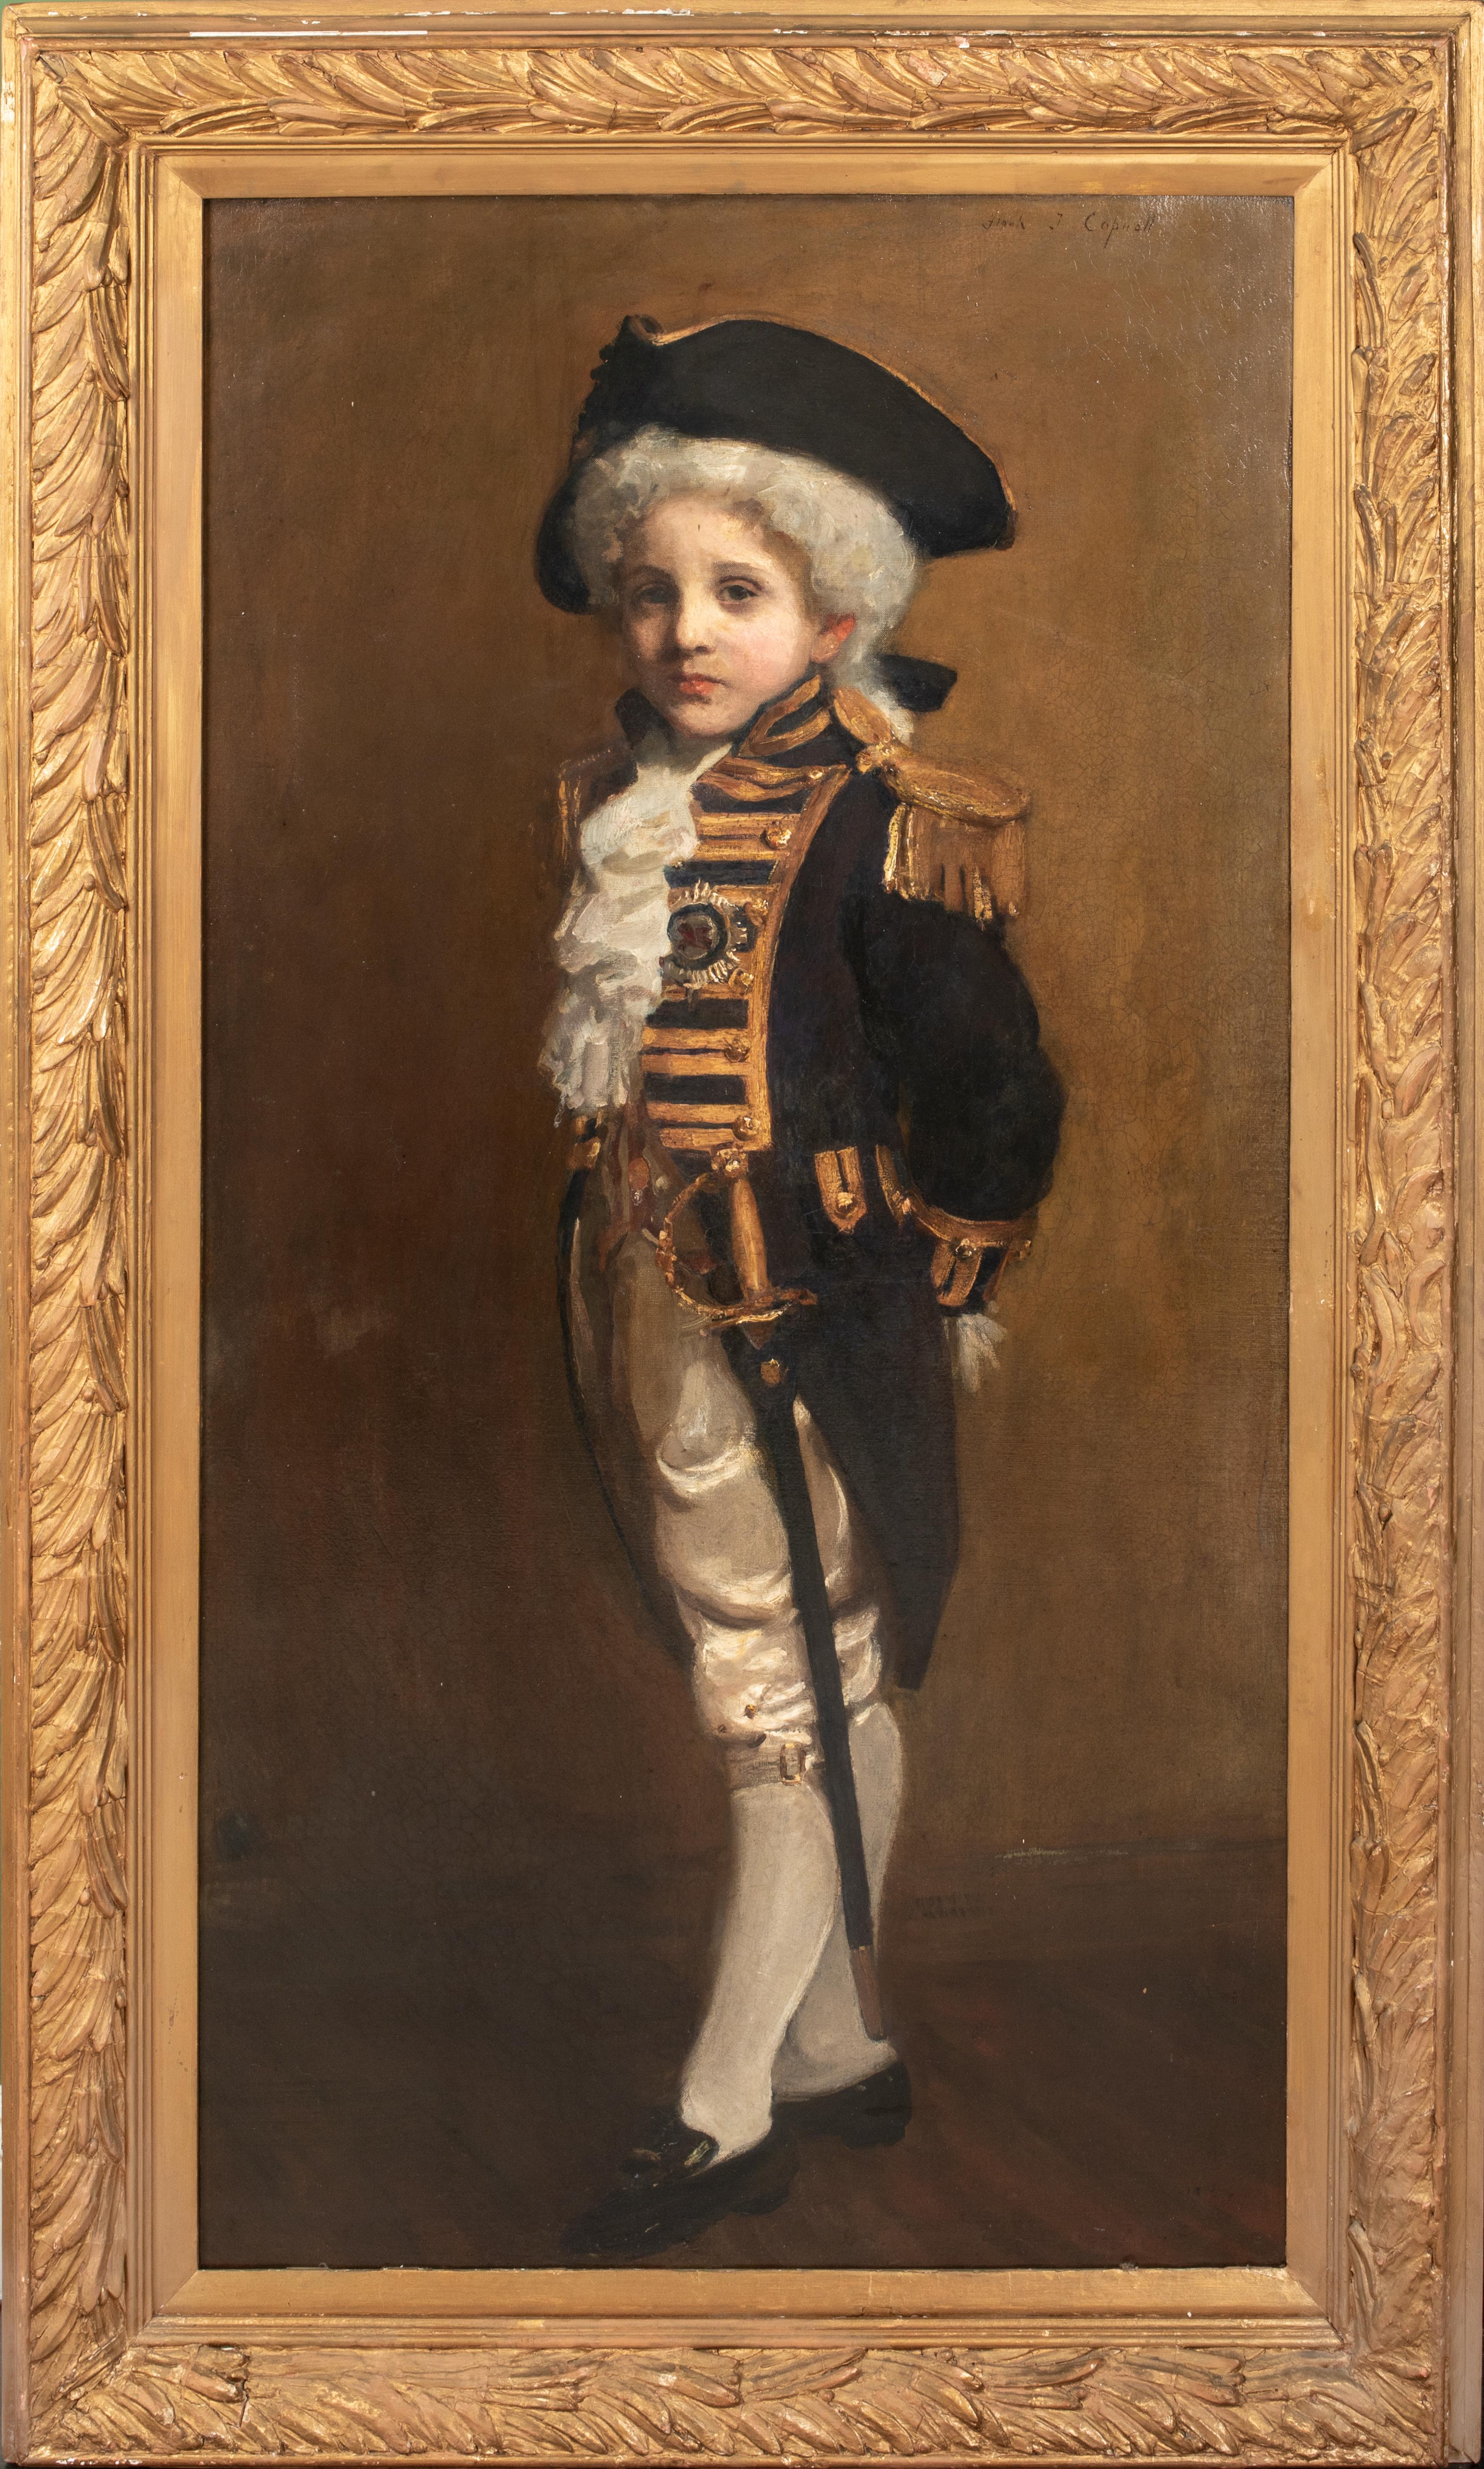 Unknown Portrait Painting -  Portrait Of A Child As Lord Nelson, 19th Century   FRANK THOMAS COPNALL